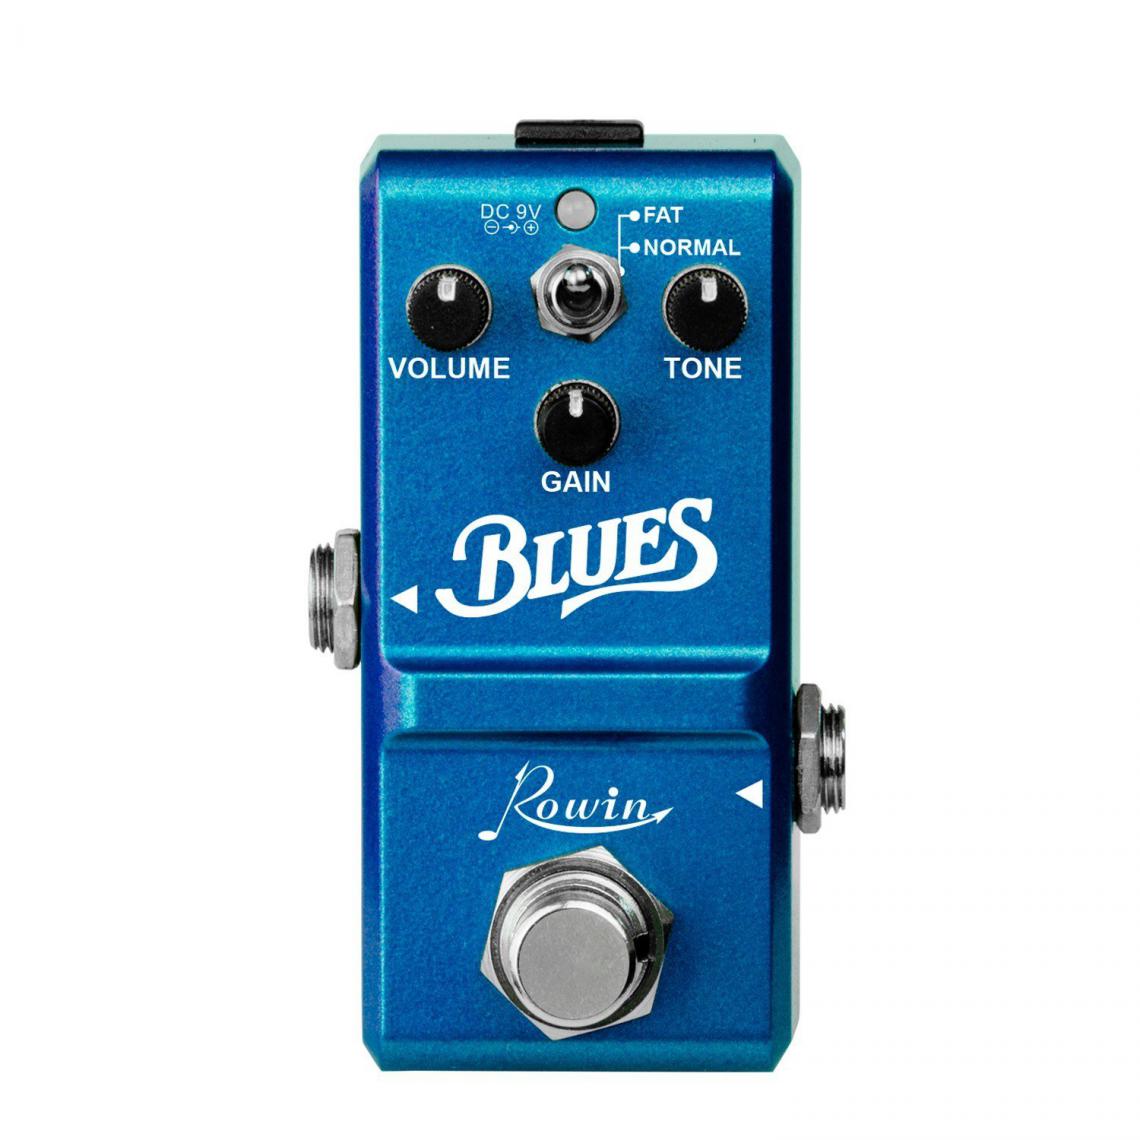 Justgreenbox - Blues Pedal Wide Range Frequency Response Style Overdrive Effet pour guitare - 4000838756507 - Effets guitares